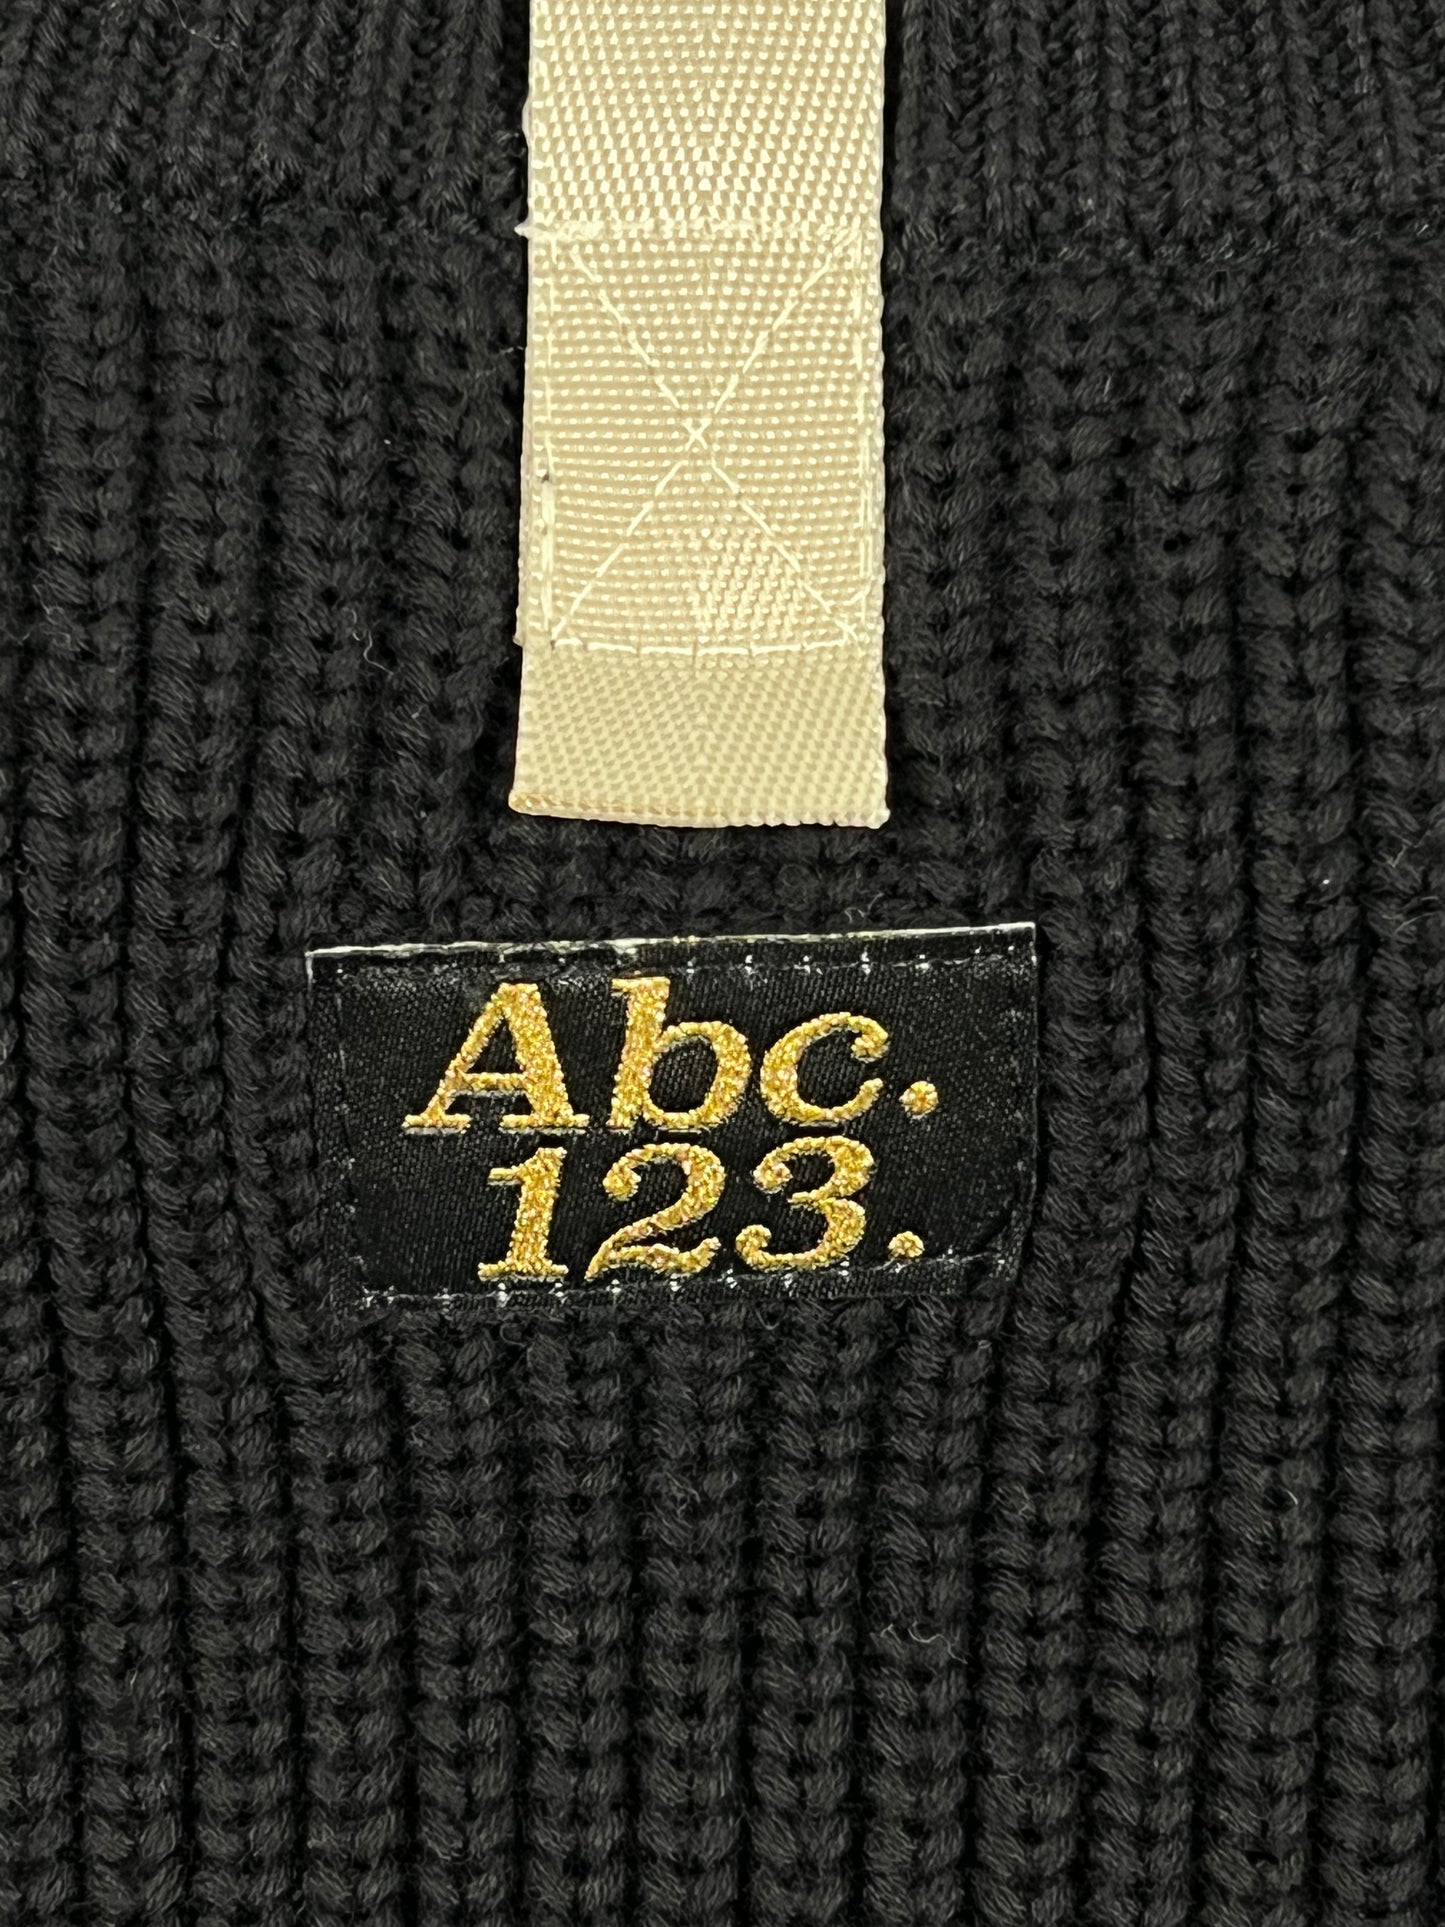 A ADVISORY BOARD CRYSTALS RIBBED CREWNECK ANTHRACITE BLACK with a gold embroidered logo on it.